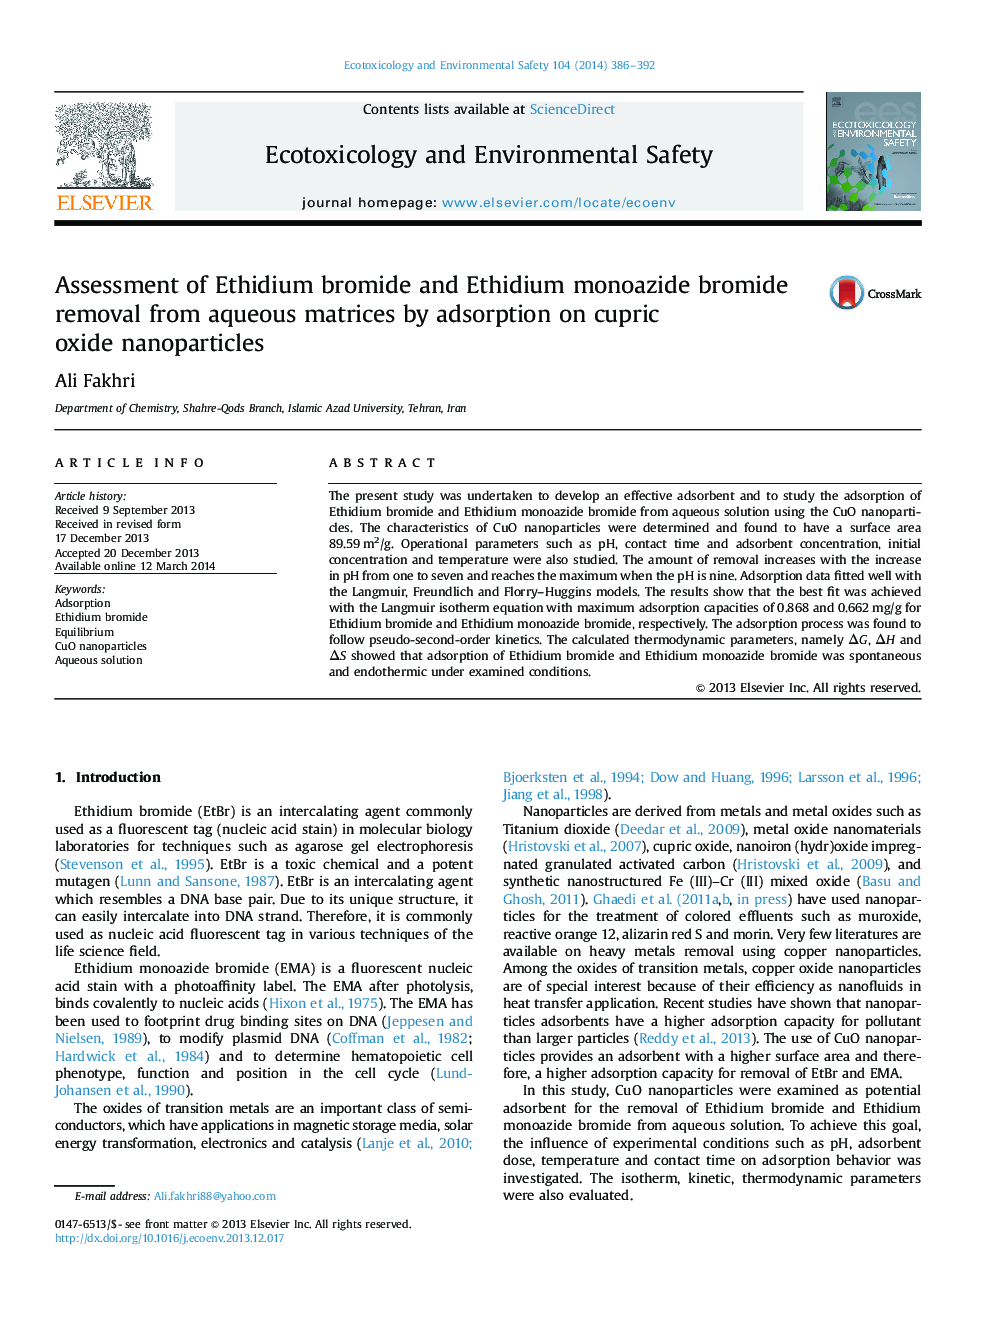 Assessment of Ethidium bromide and Ethidium monoazide bromide removal from aqueous matrices by adsorption on cupric oxide nanoparticles